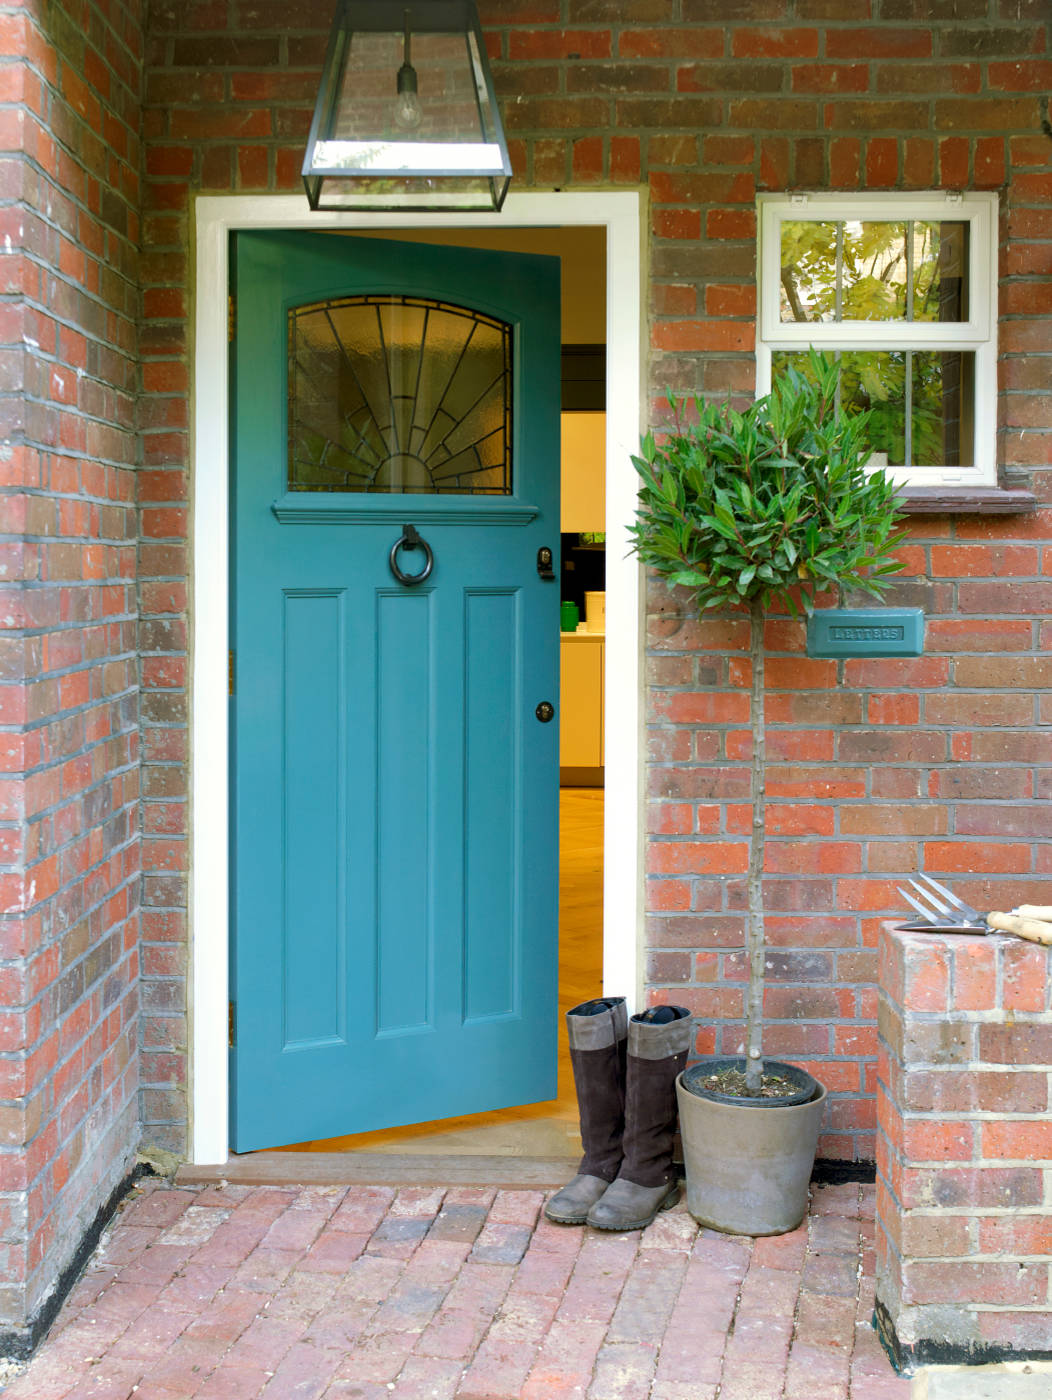 Tips for Choosing the Perfect Doors for Your Home